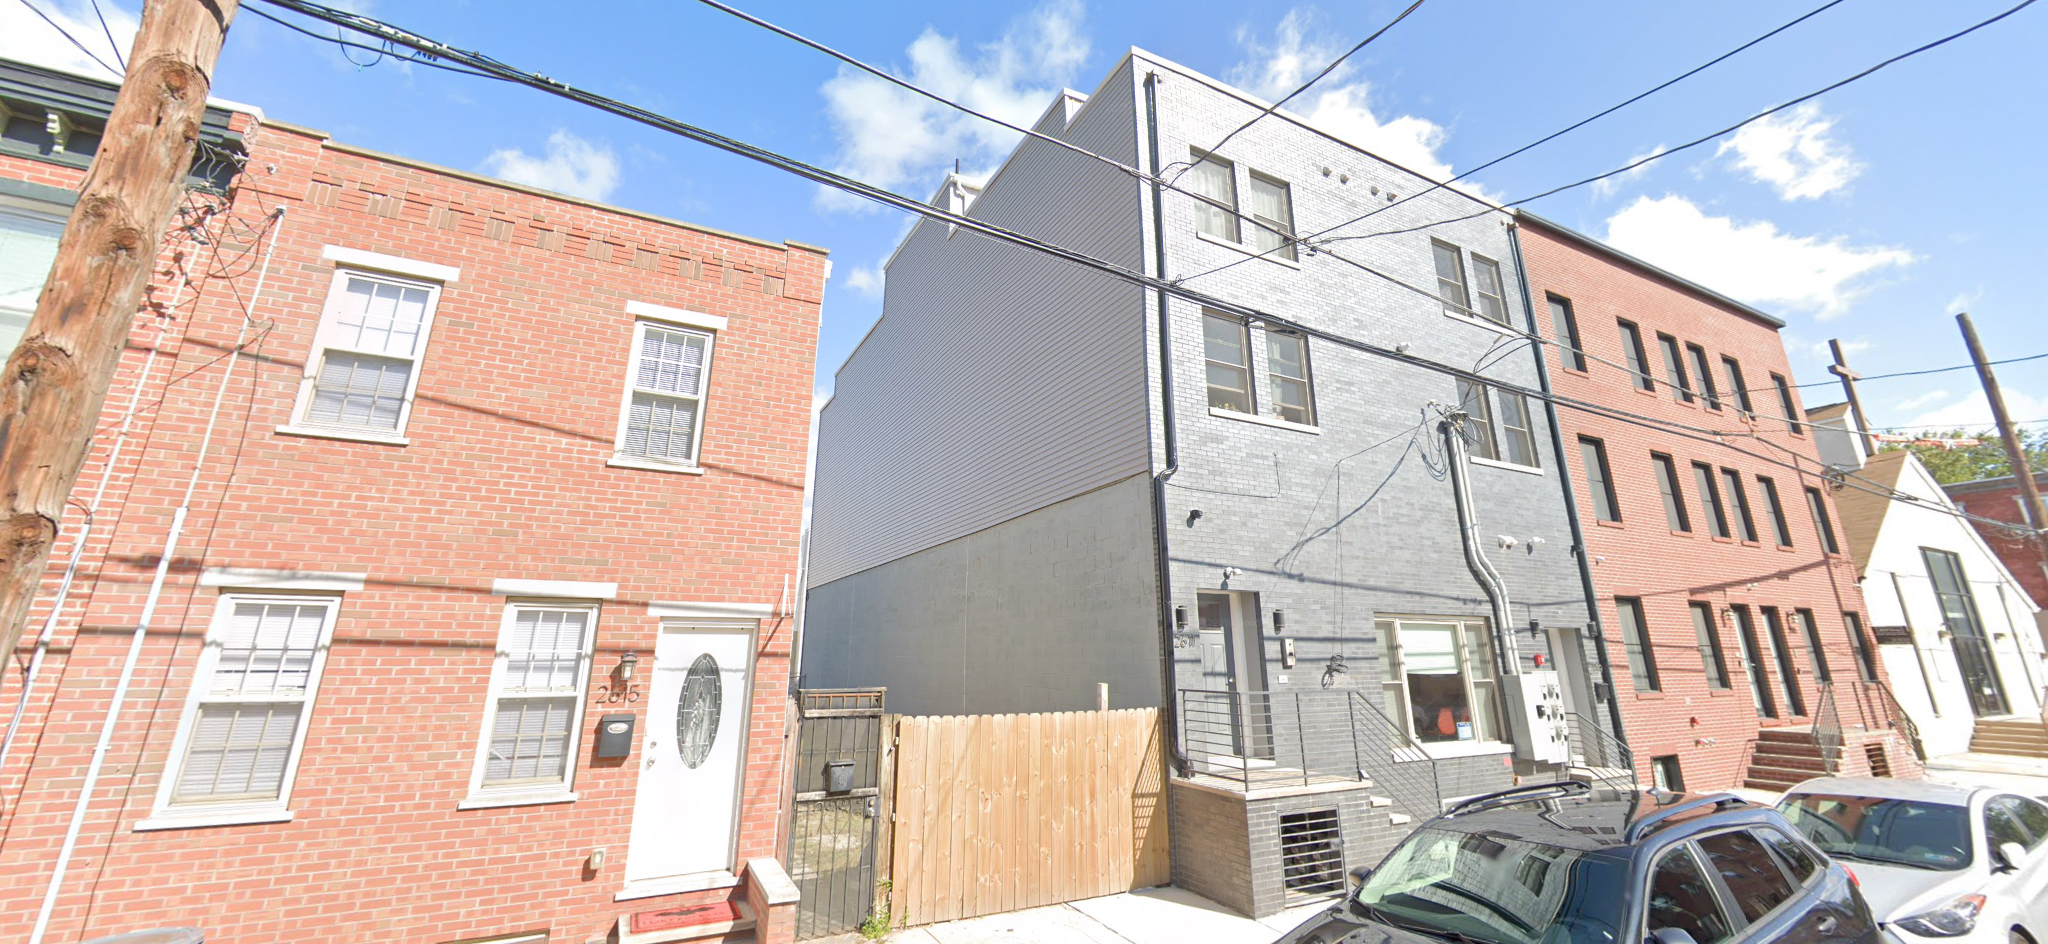 Current view of 2613 Federal Street. Credit: Google.